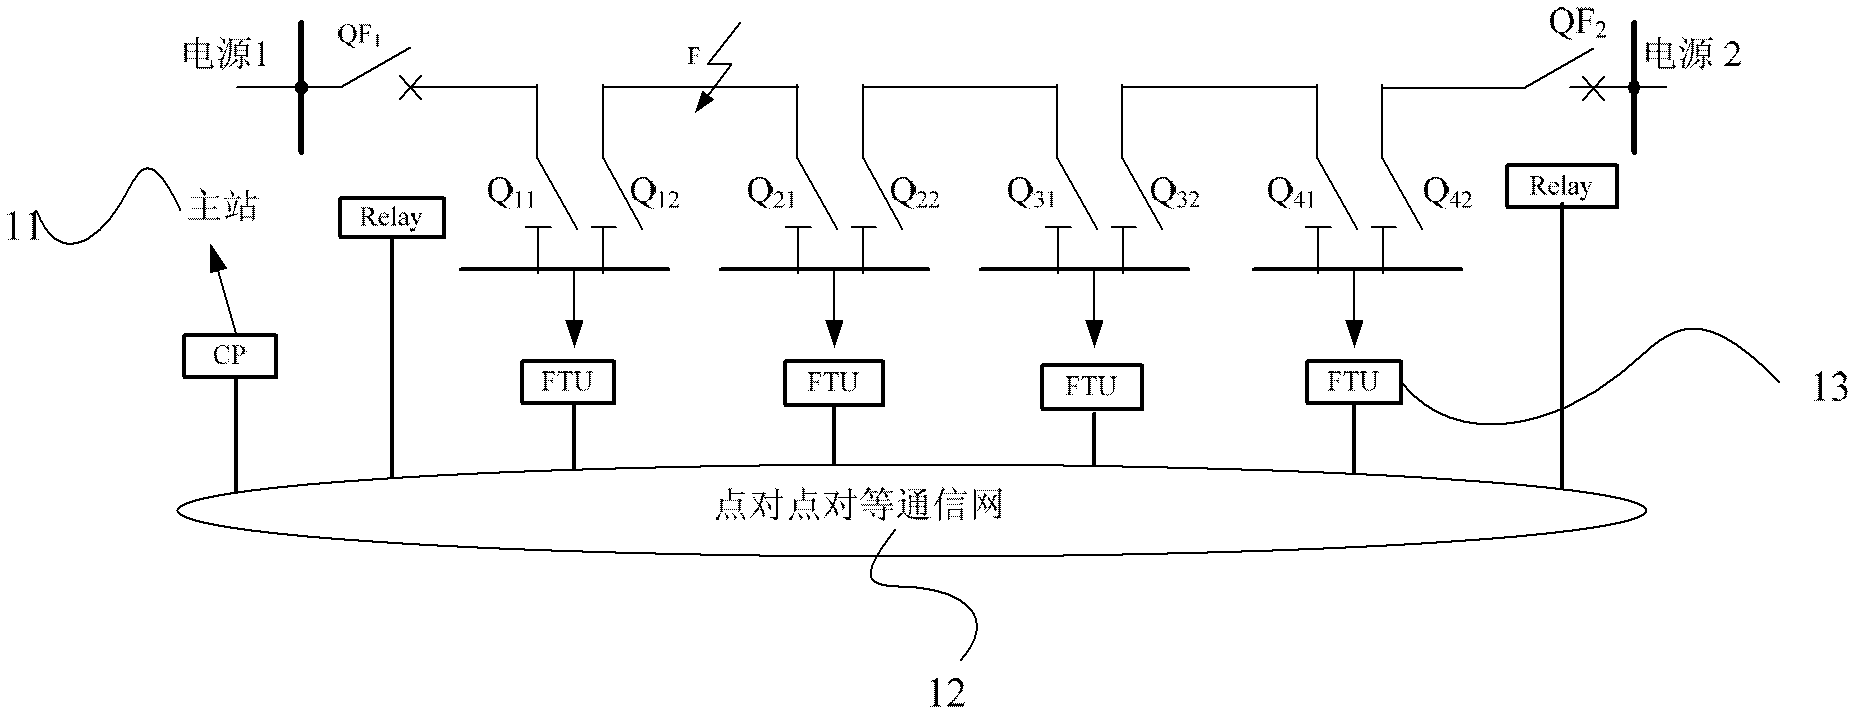 Method and system for realizing fault self-healing